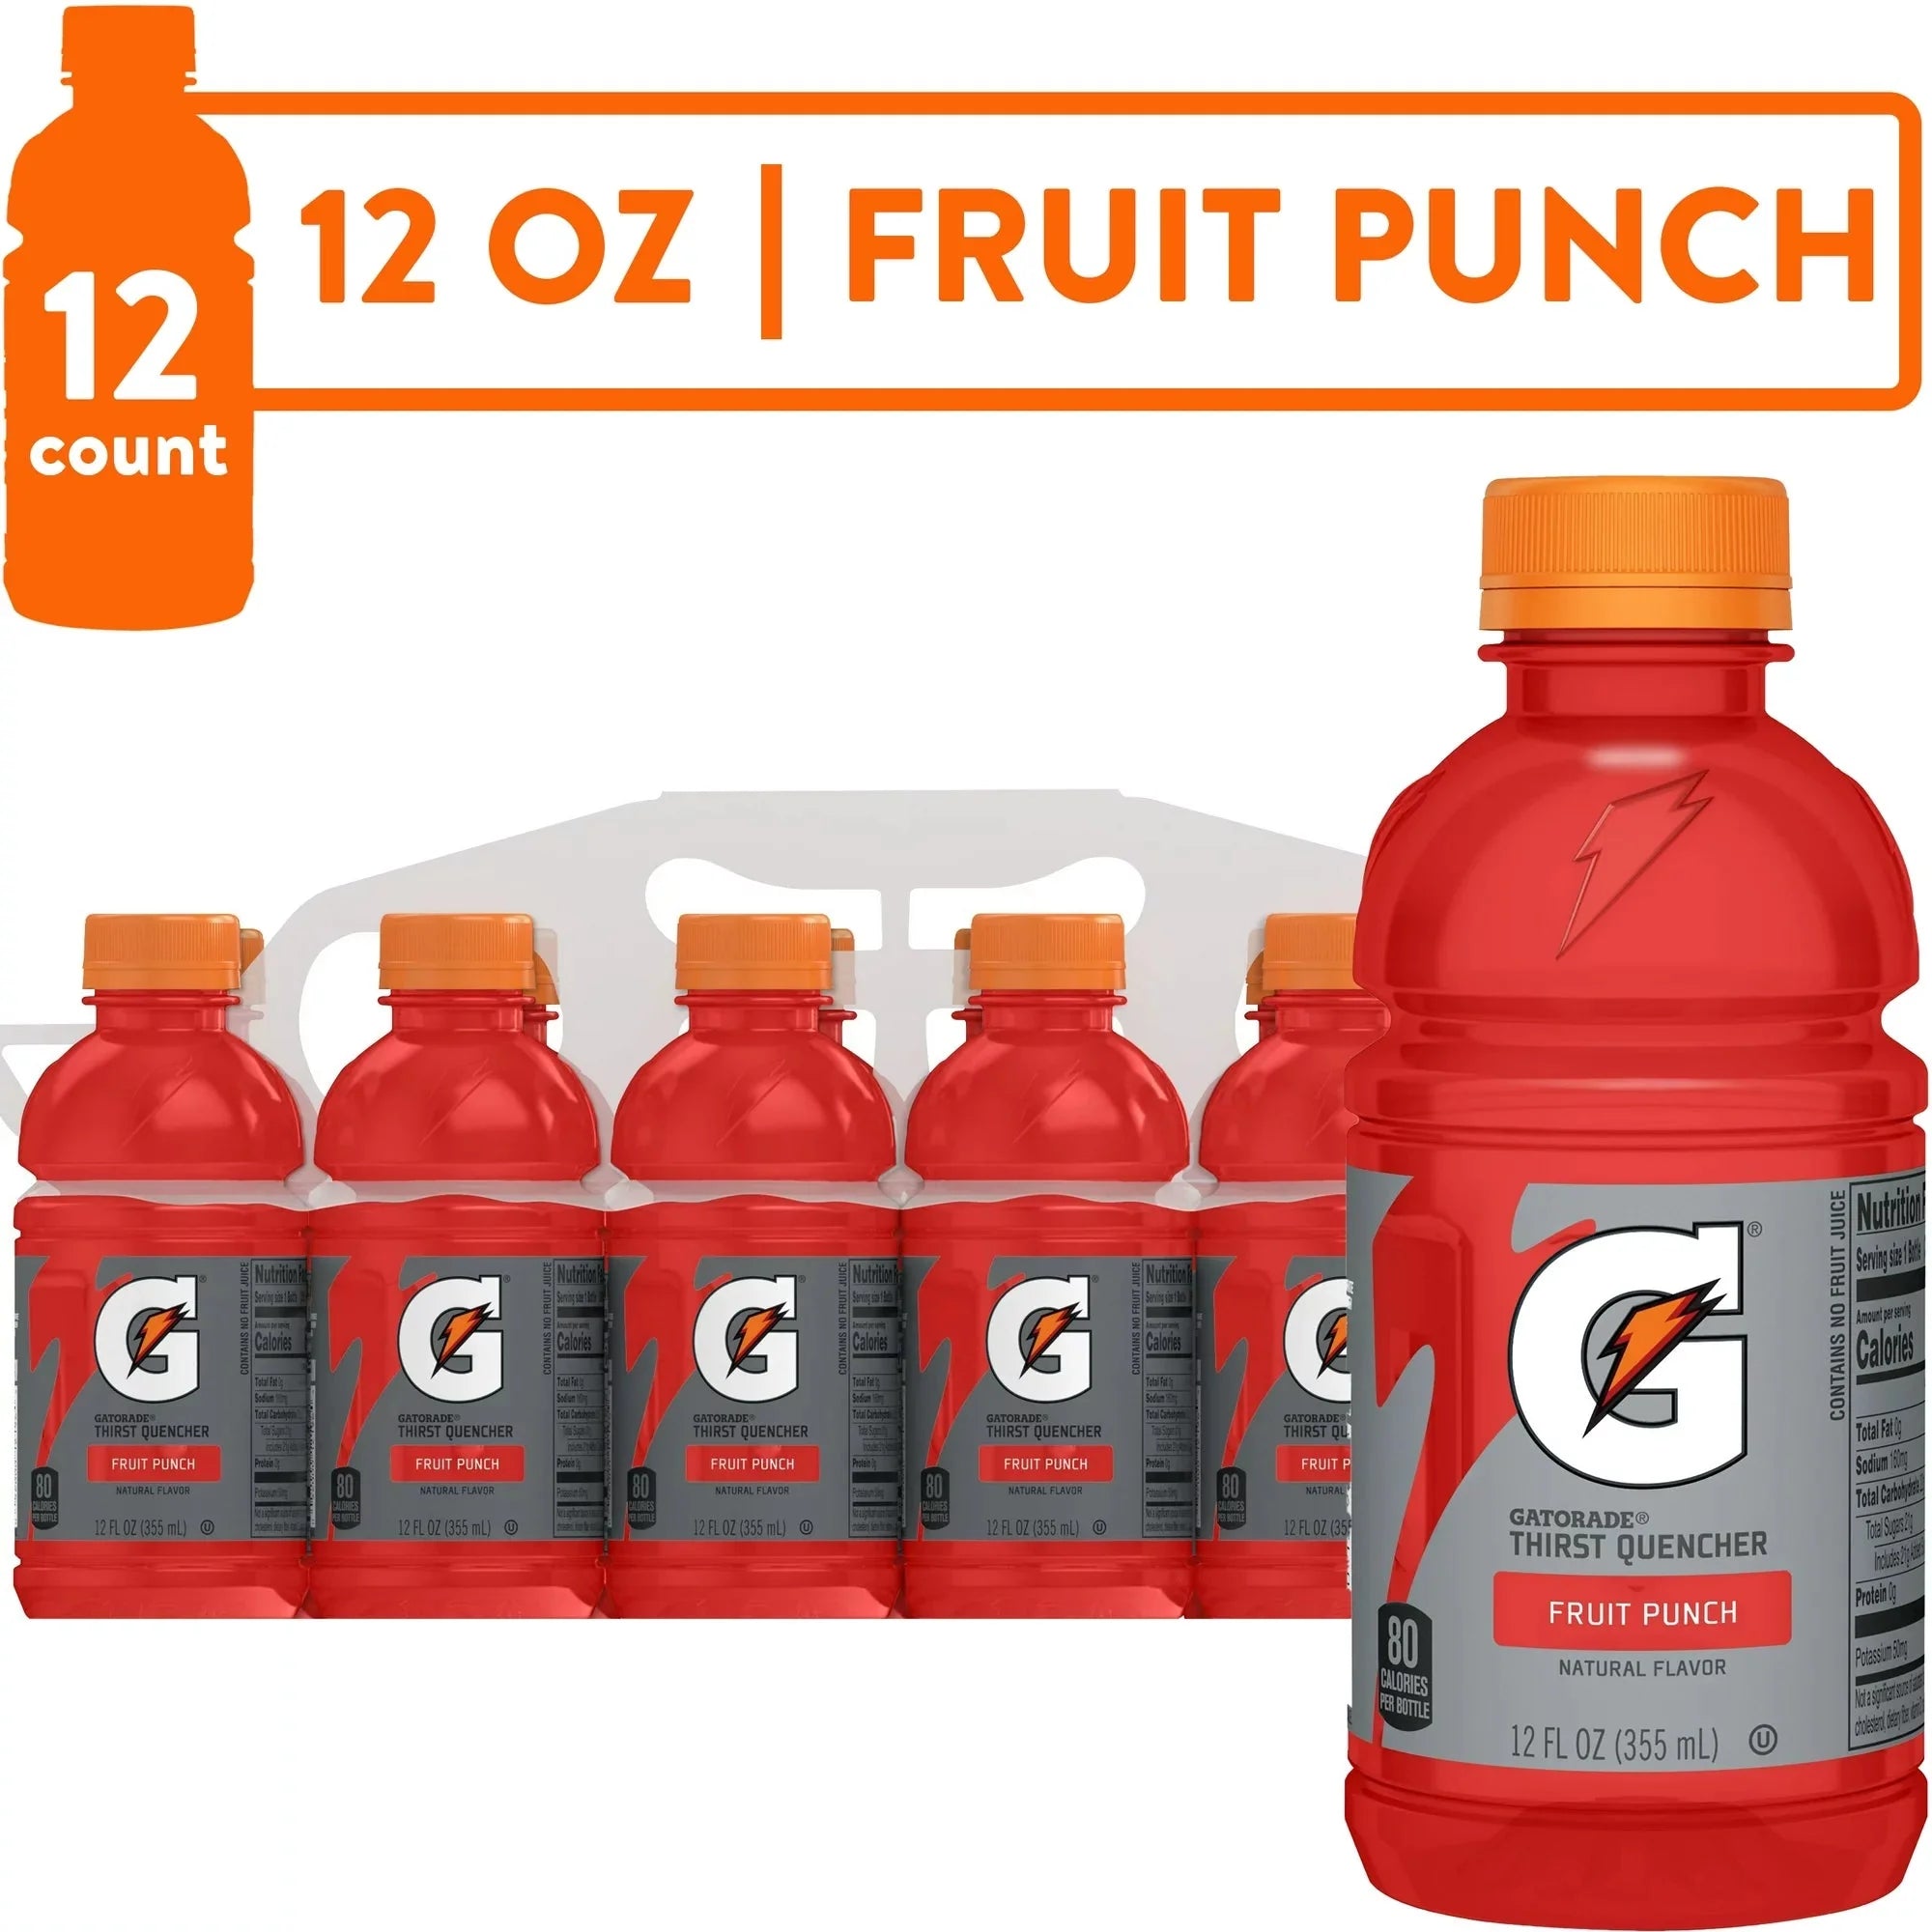 Wholesale prices with free shipping all over United States Gatorade Thirst Quencher Sports Drink, Fruit Punch, 12 fl oz, 12 Pack Bottles - Steven Deals